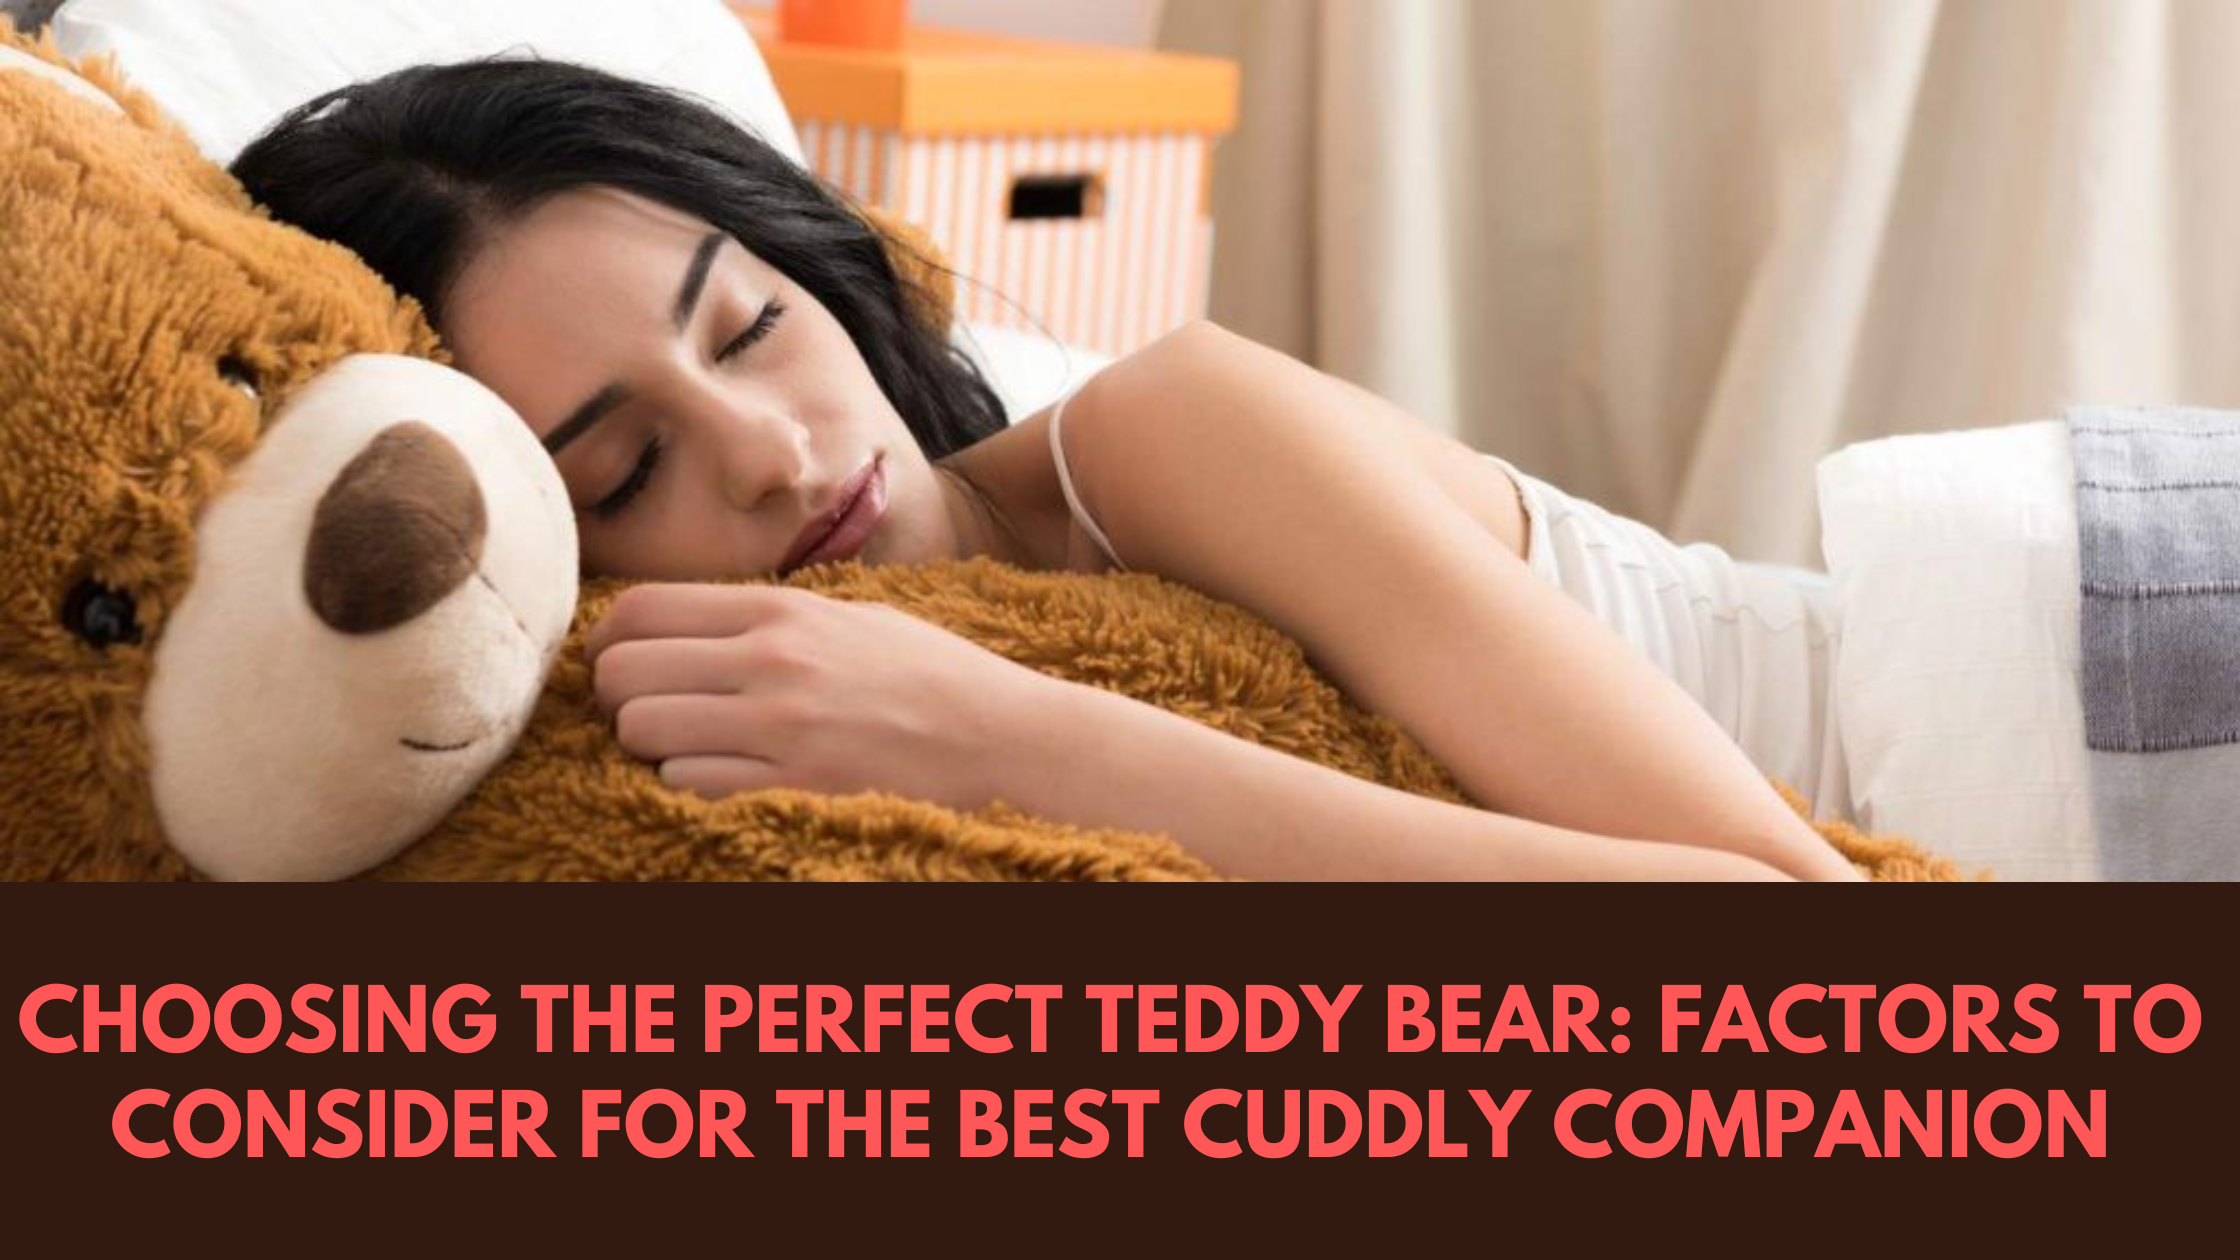 Choosing the Perfect Teddy Bear: Factors to Consider for the Best Cuddly Companion